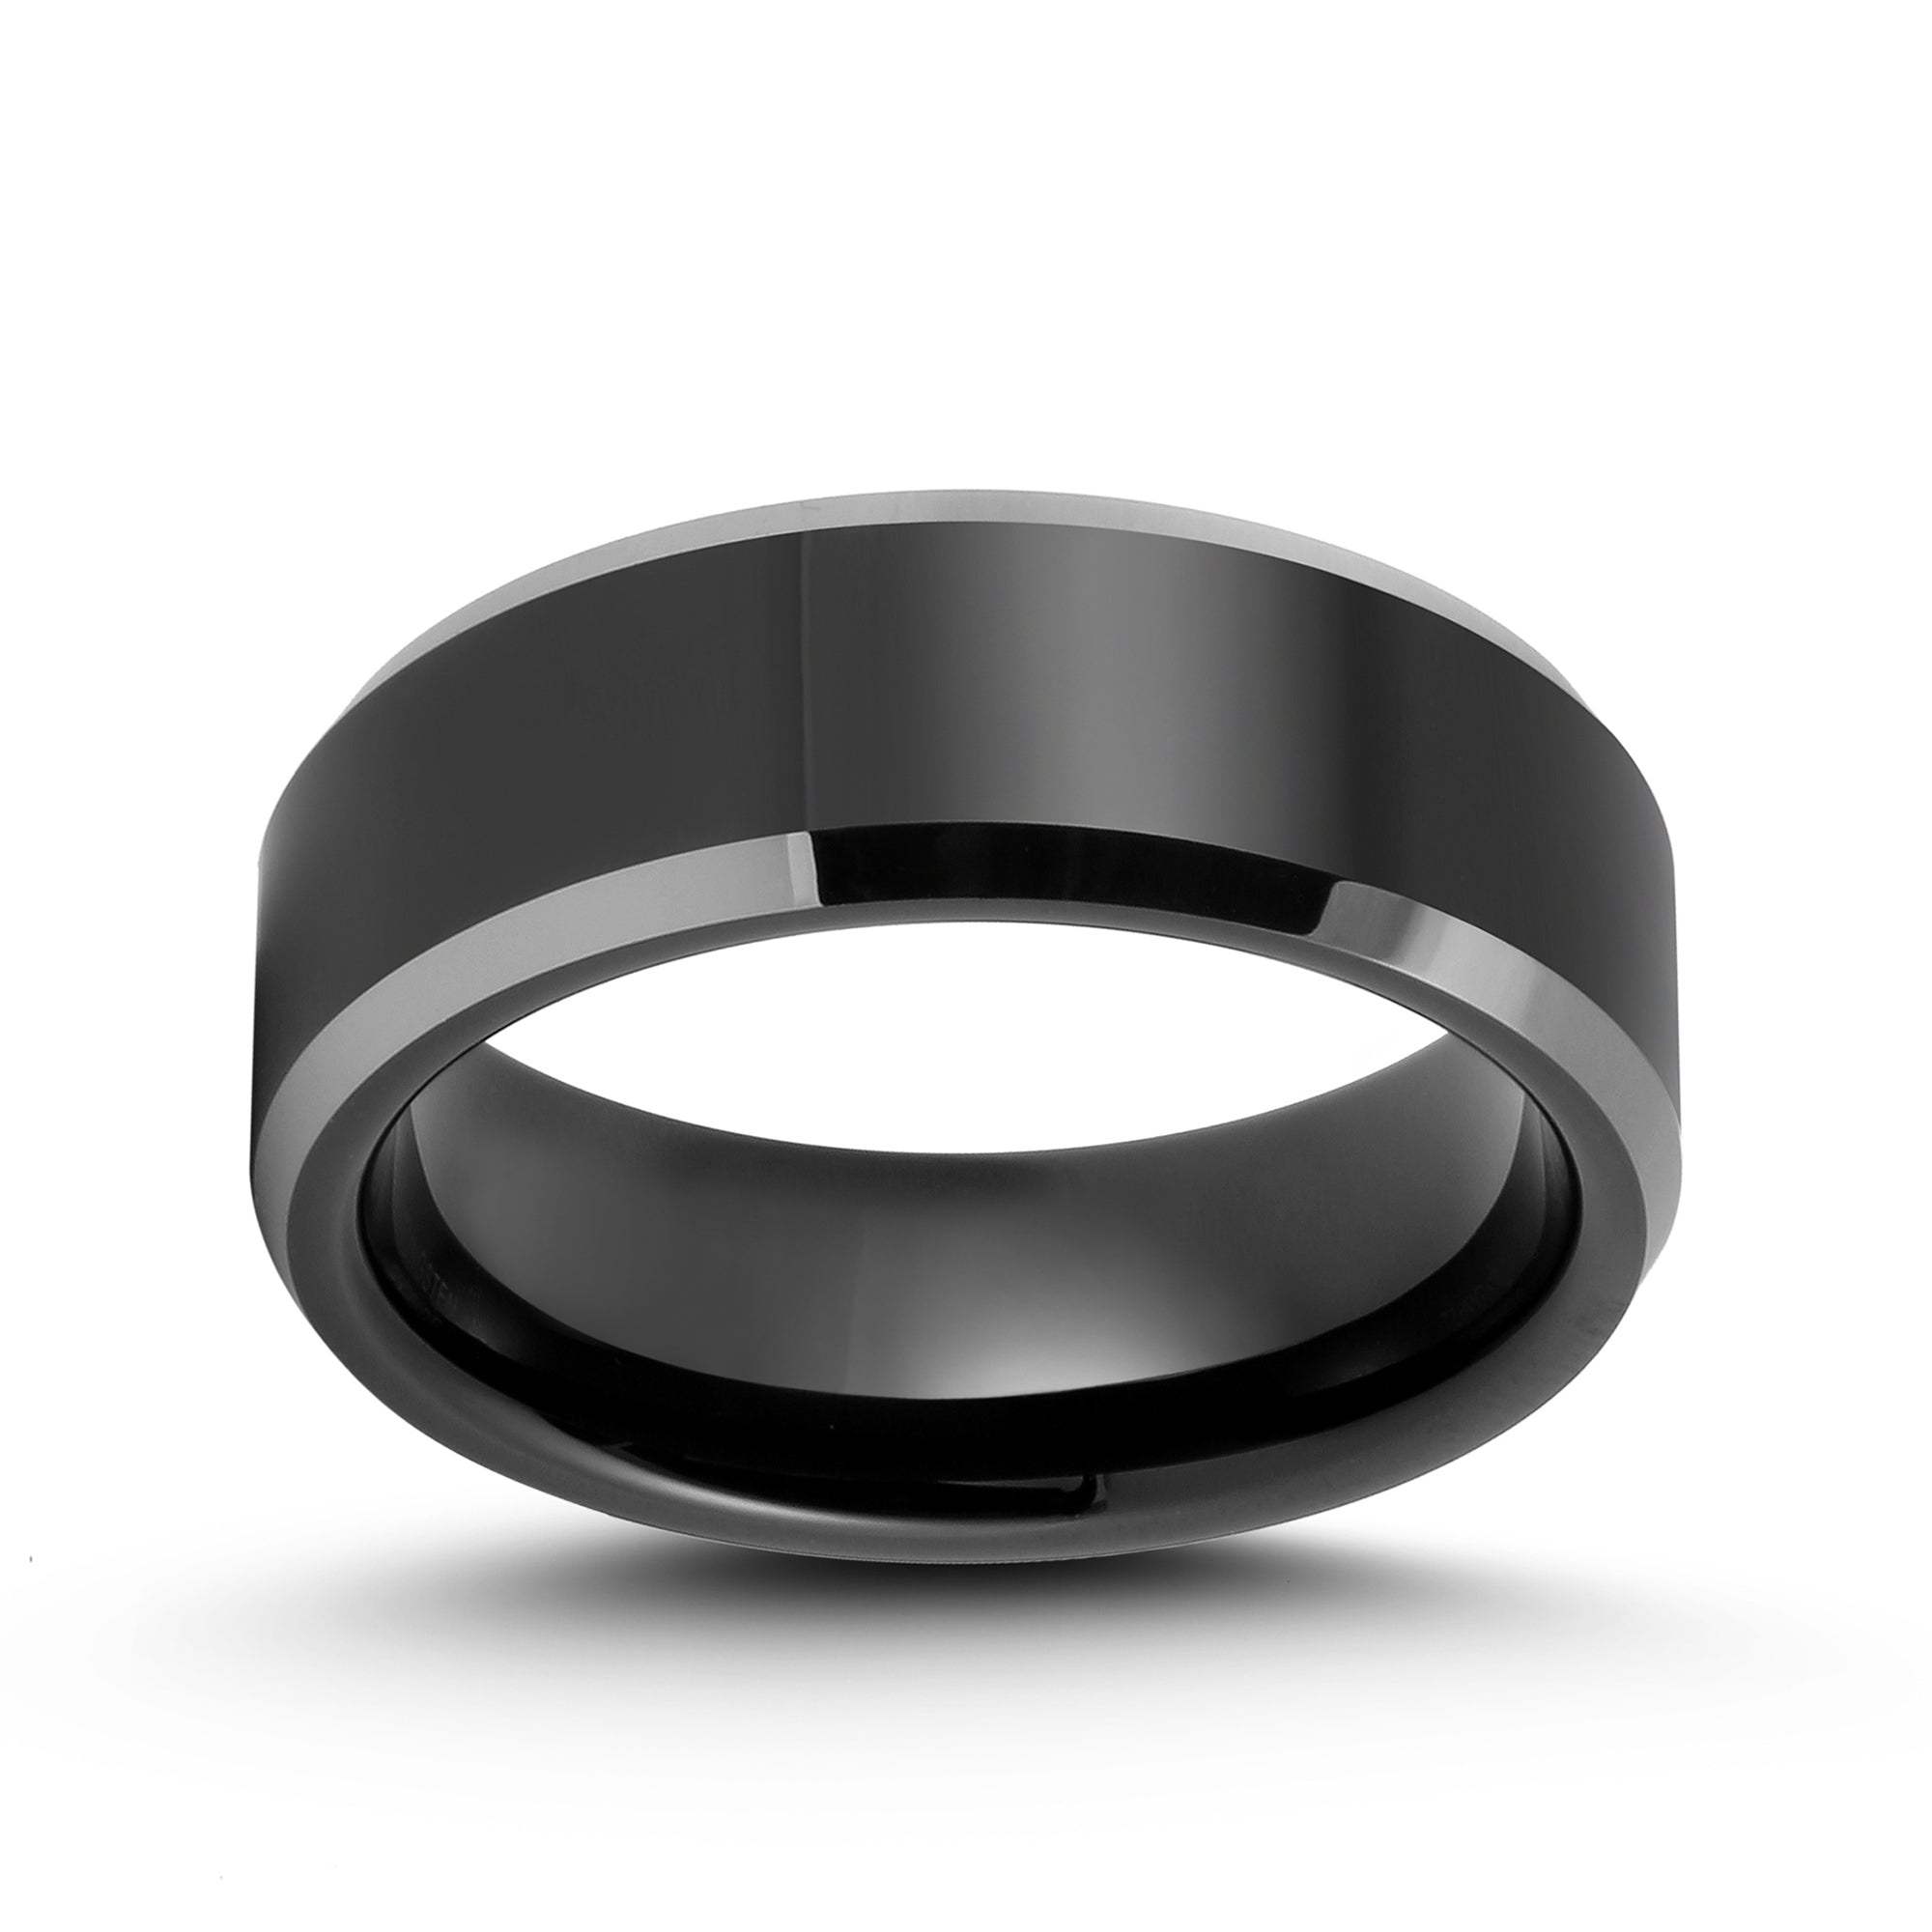 Two-Tone Black & Silver Tungsten Carbide Ring, Polished Beveled Edge, 8MM